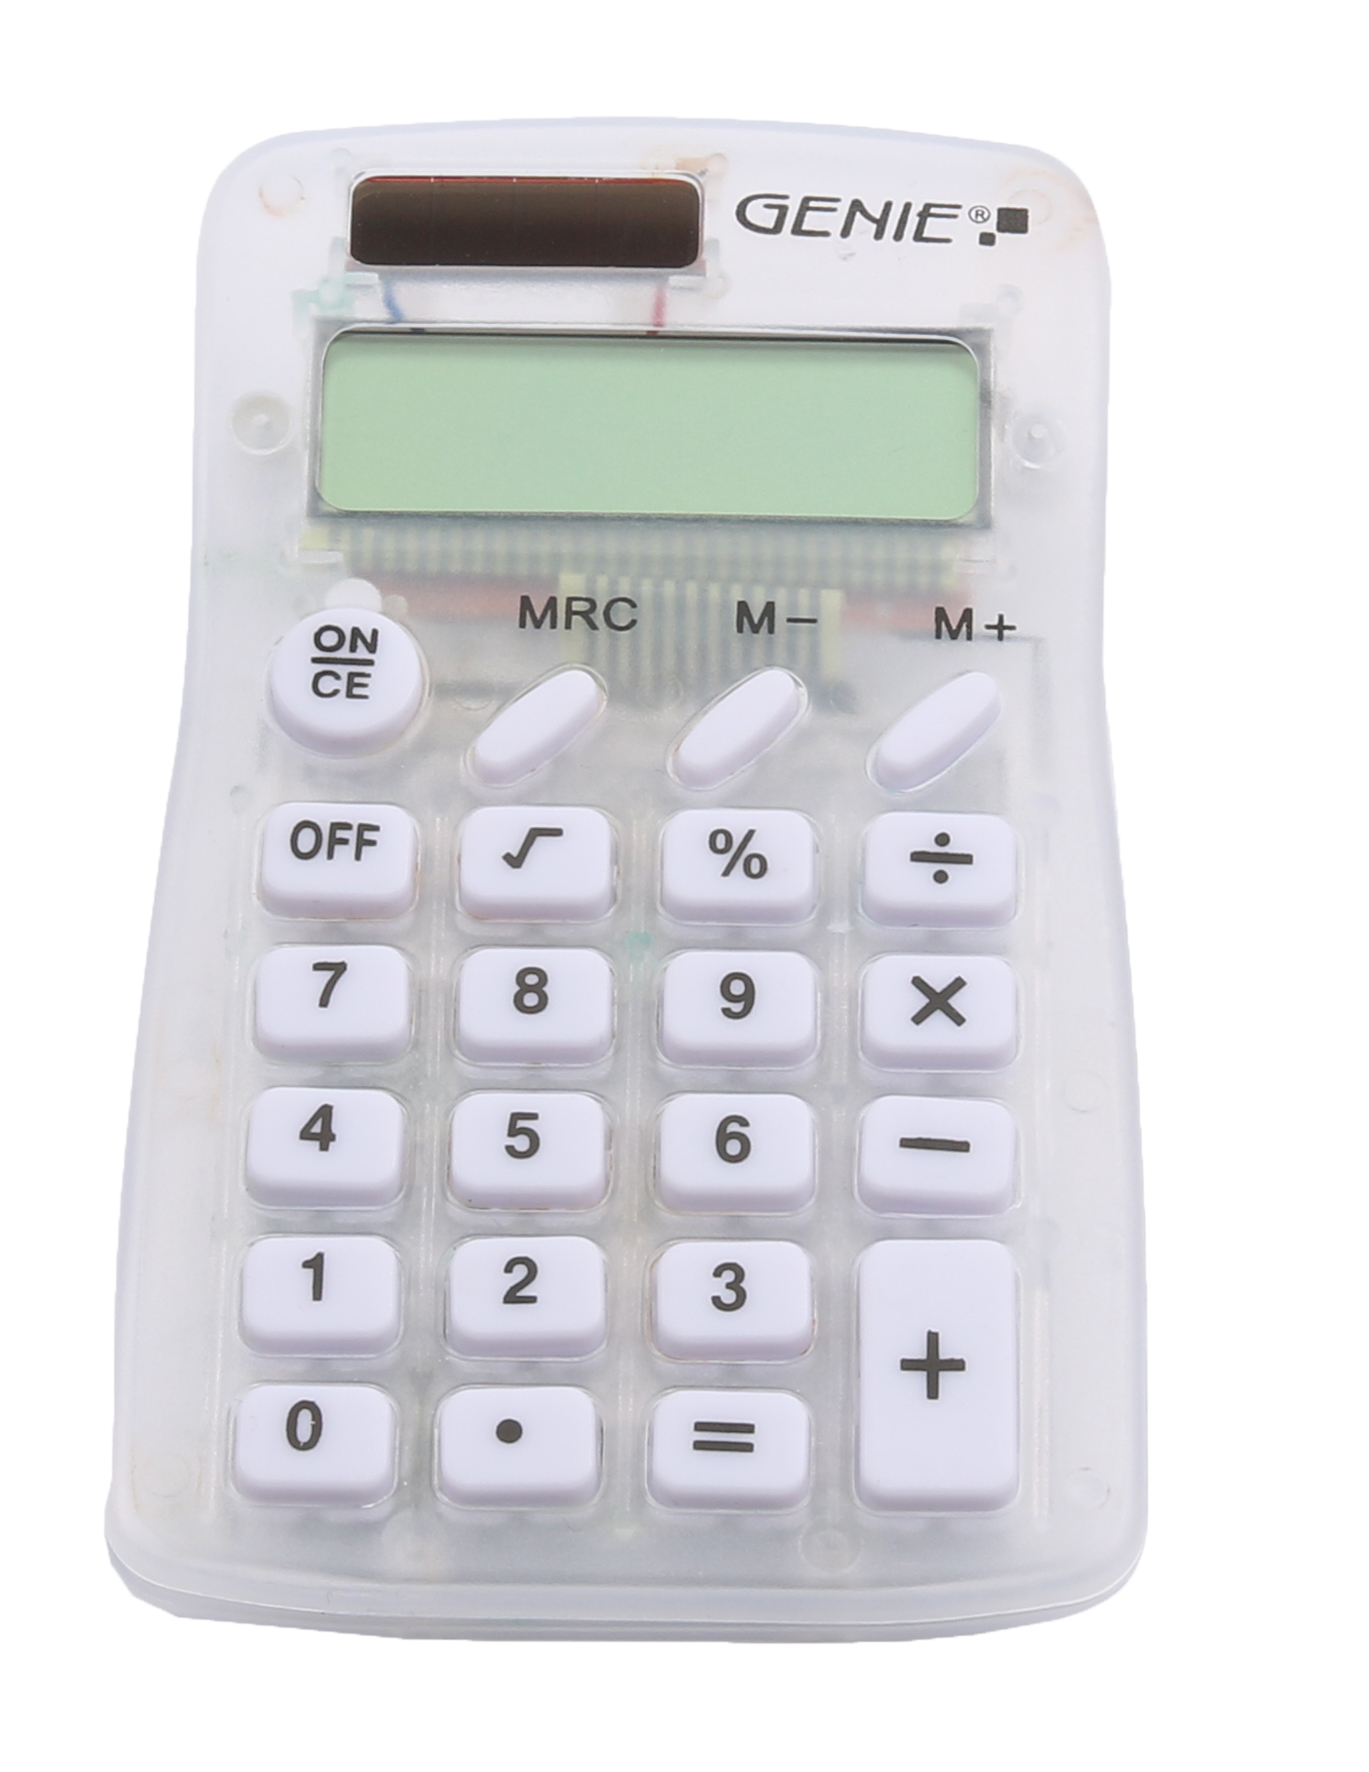 Compact pocket calculator with 8-digit display, translucent housing